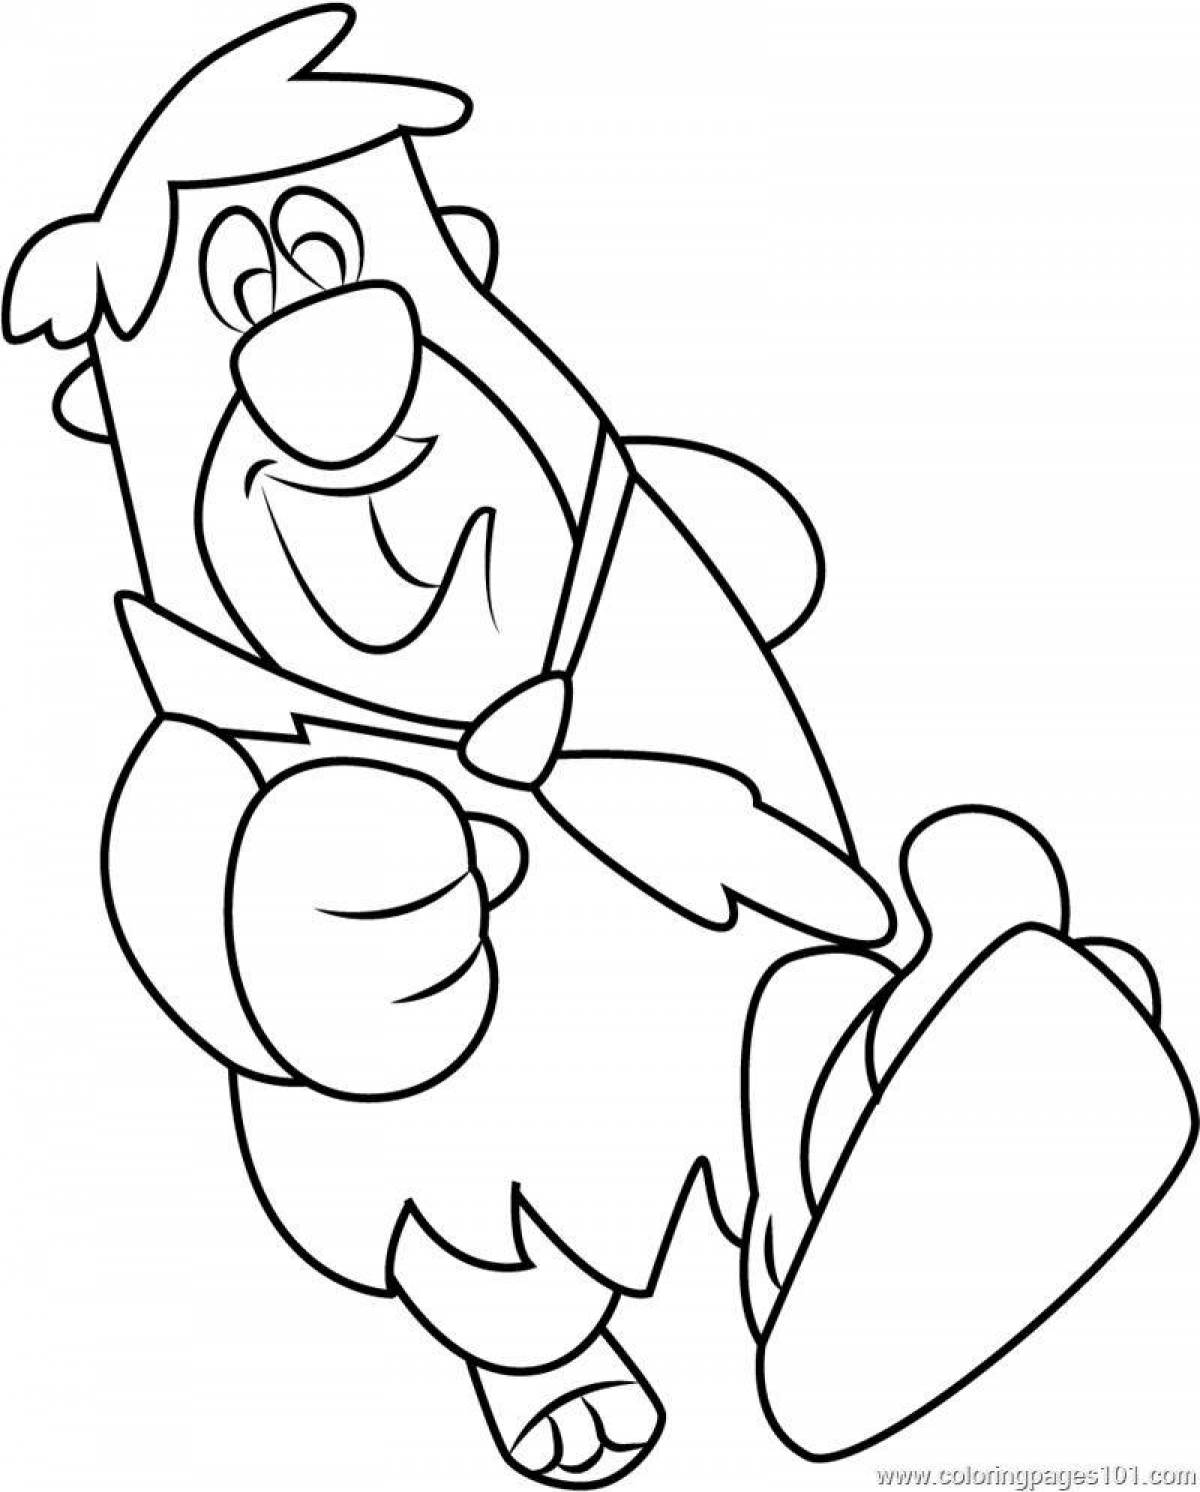 Fred flintstone's amazing coloring book